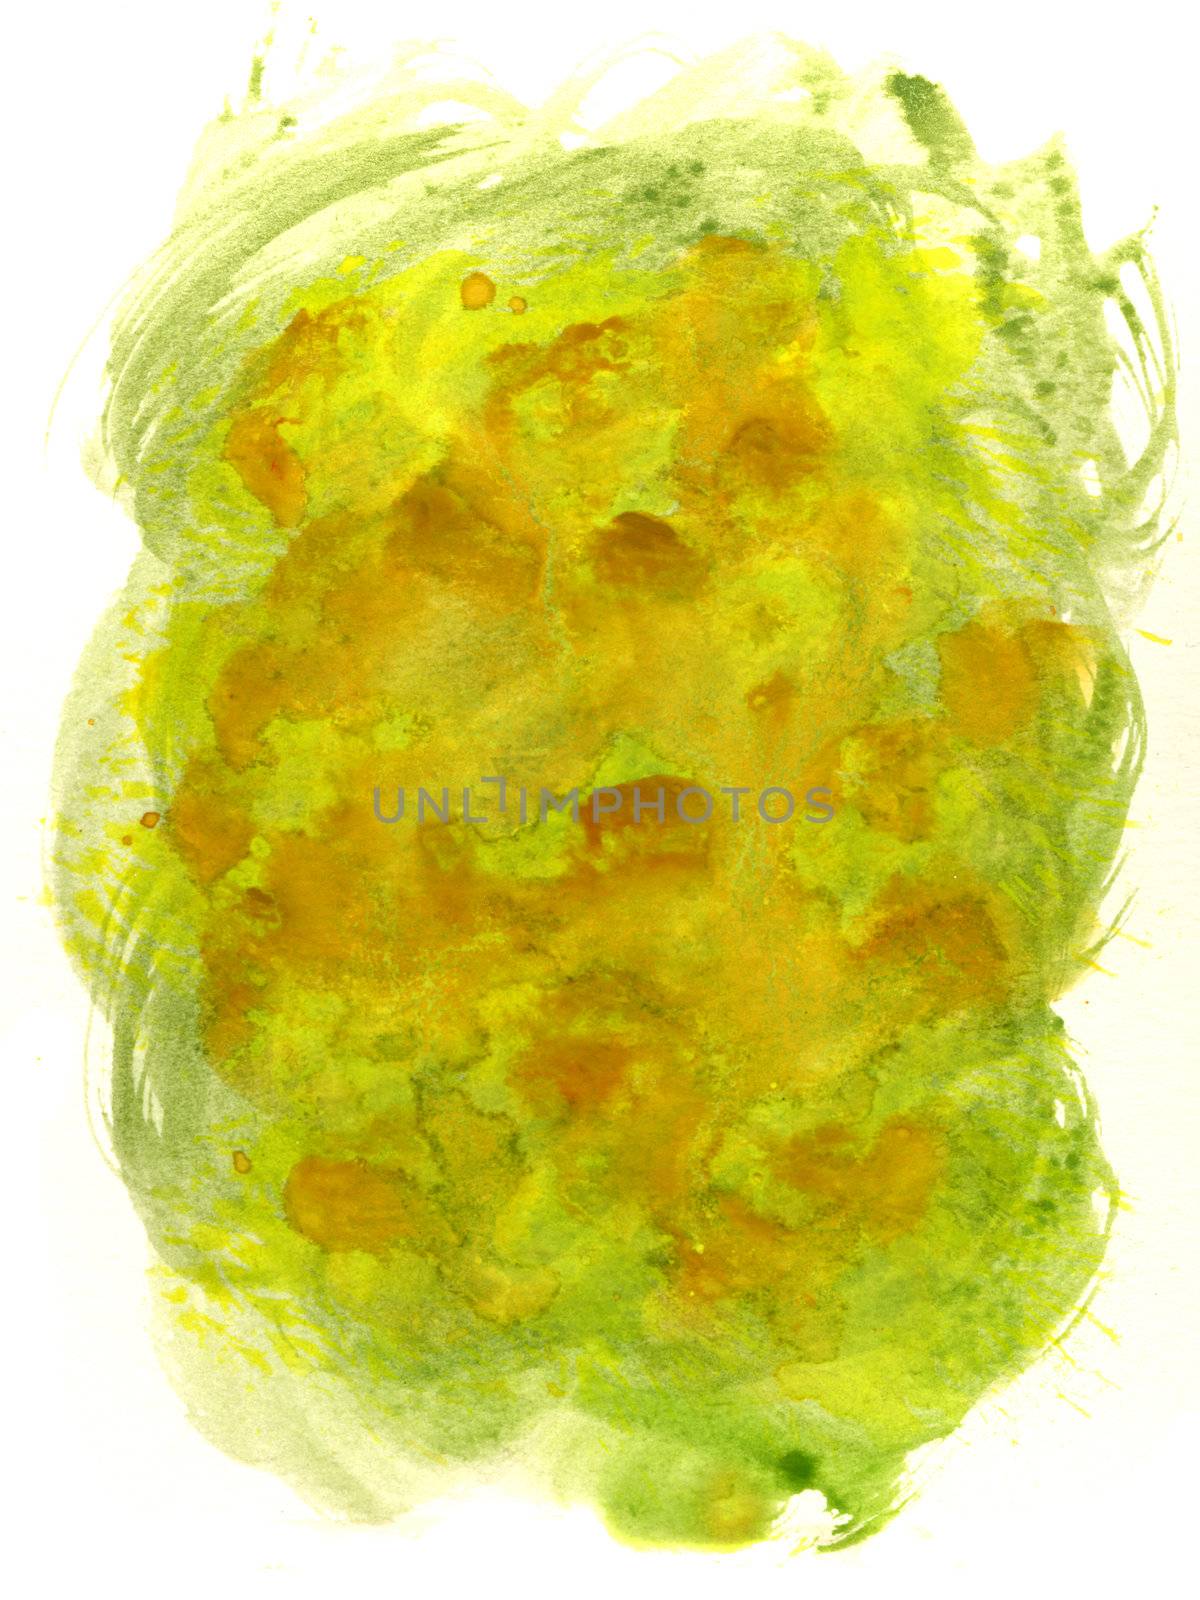 green, yellow, brown watercolor abstract by PixelsAway